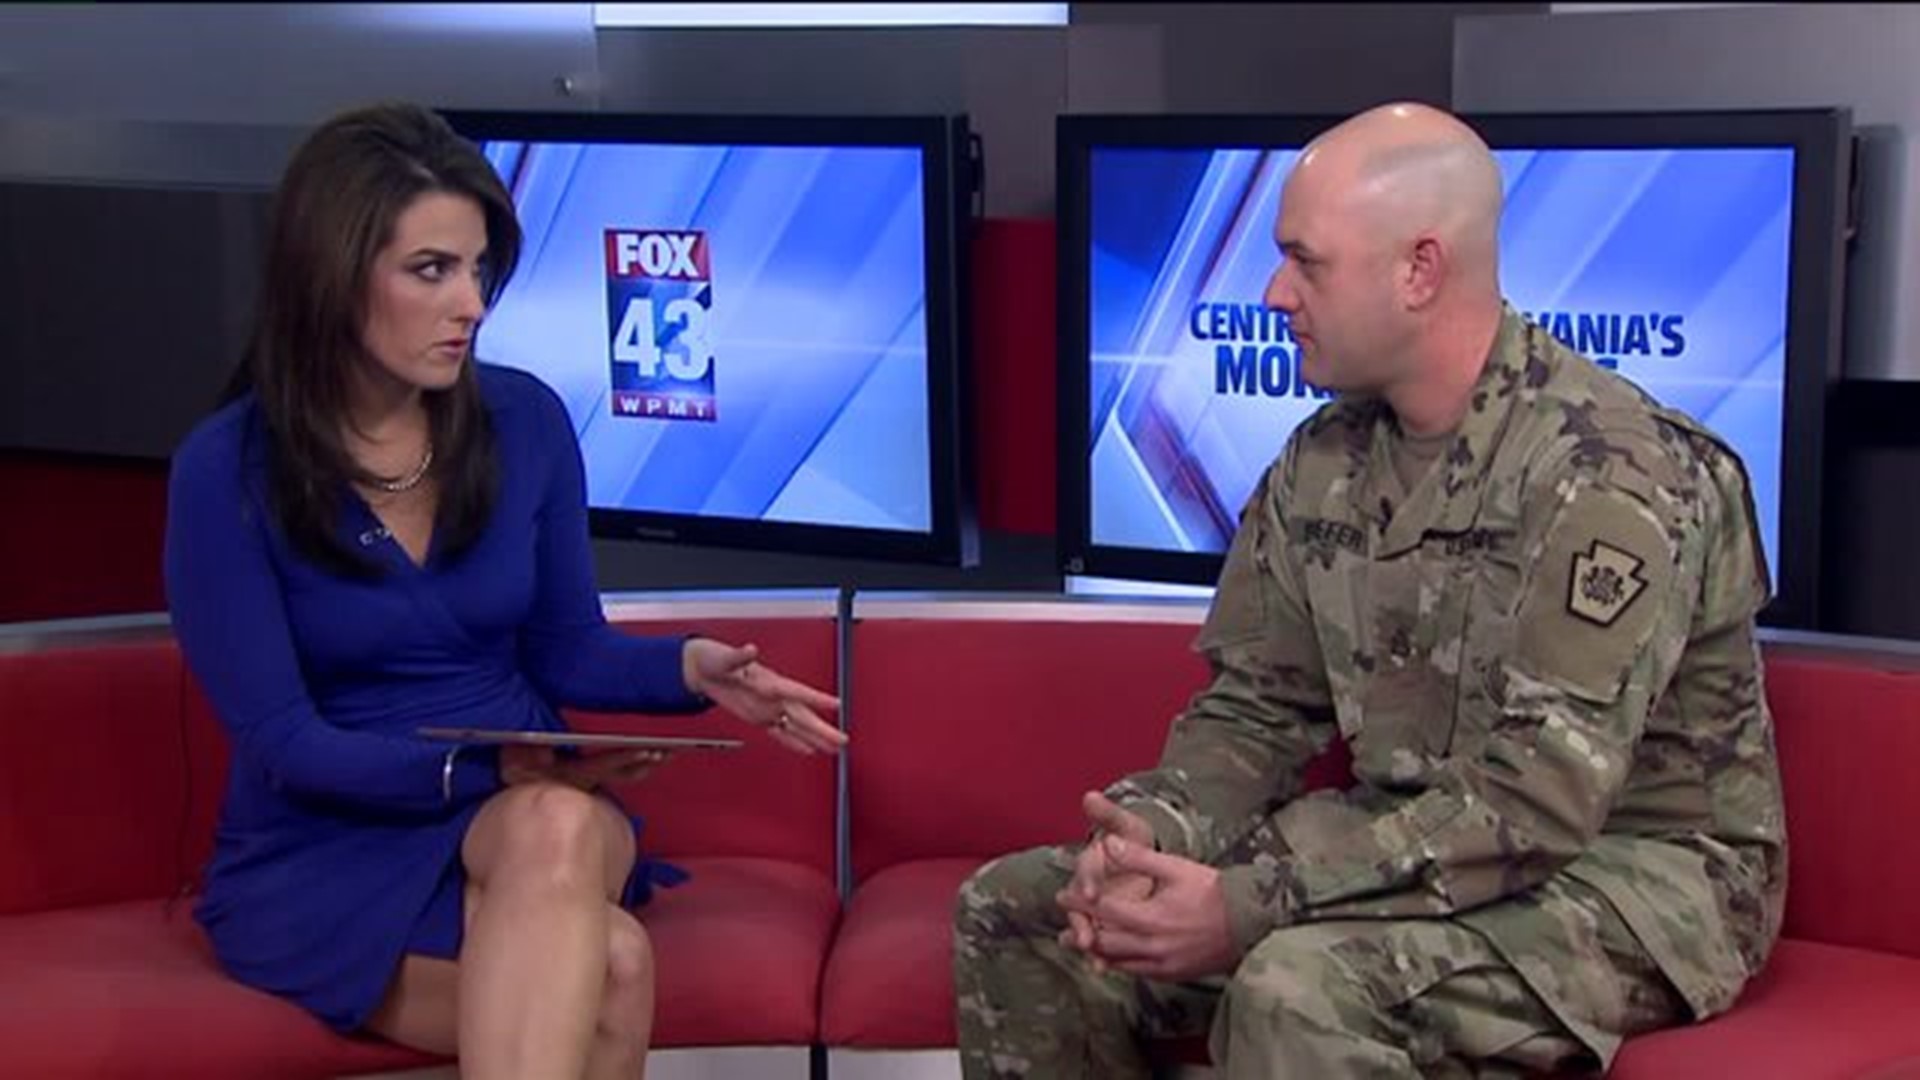 Joining the PA National Guard allows you to take advantage of education benefits